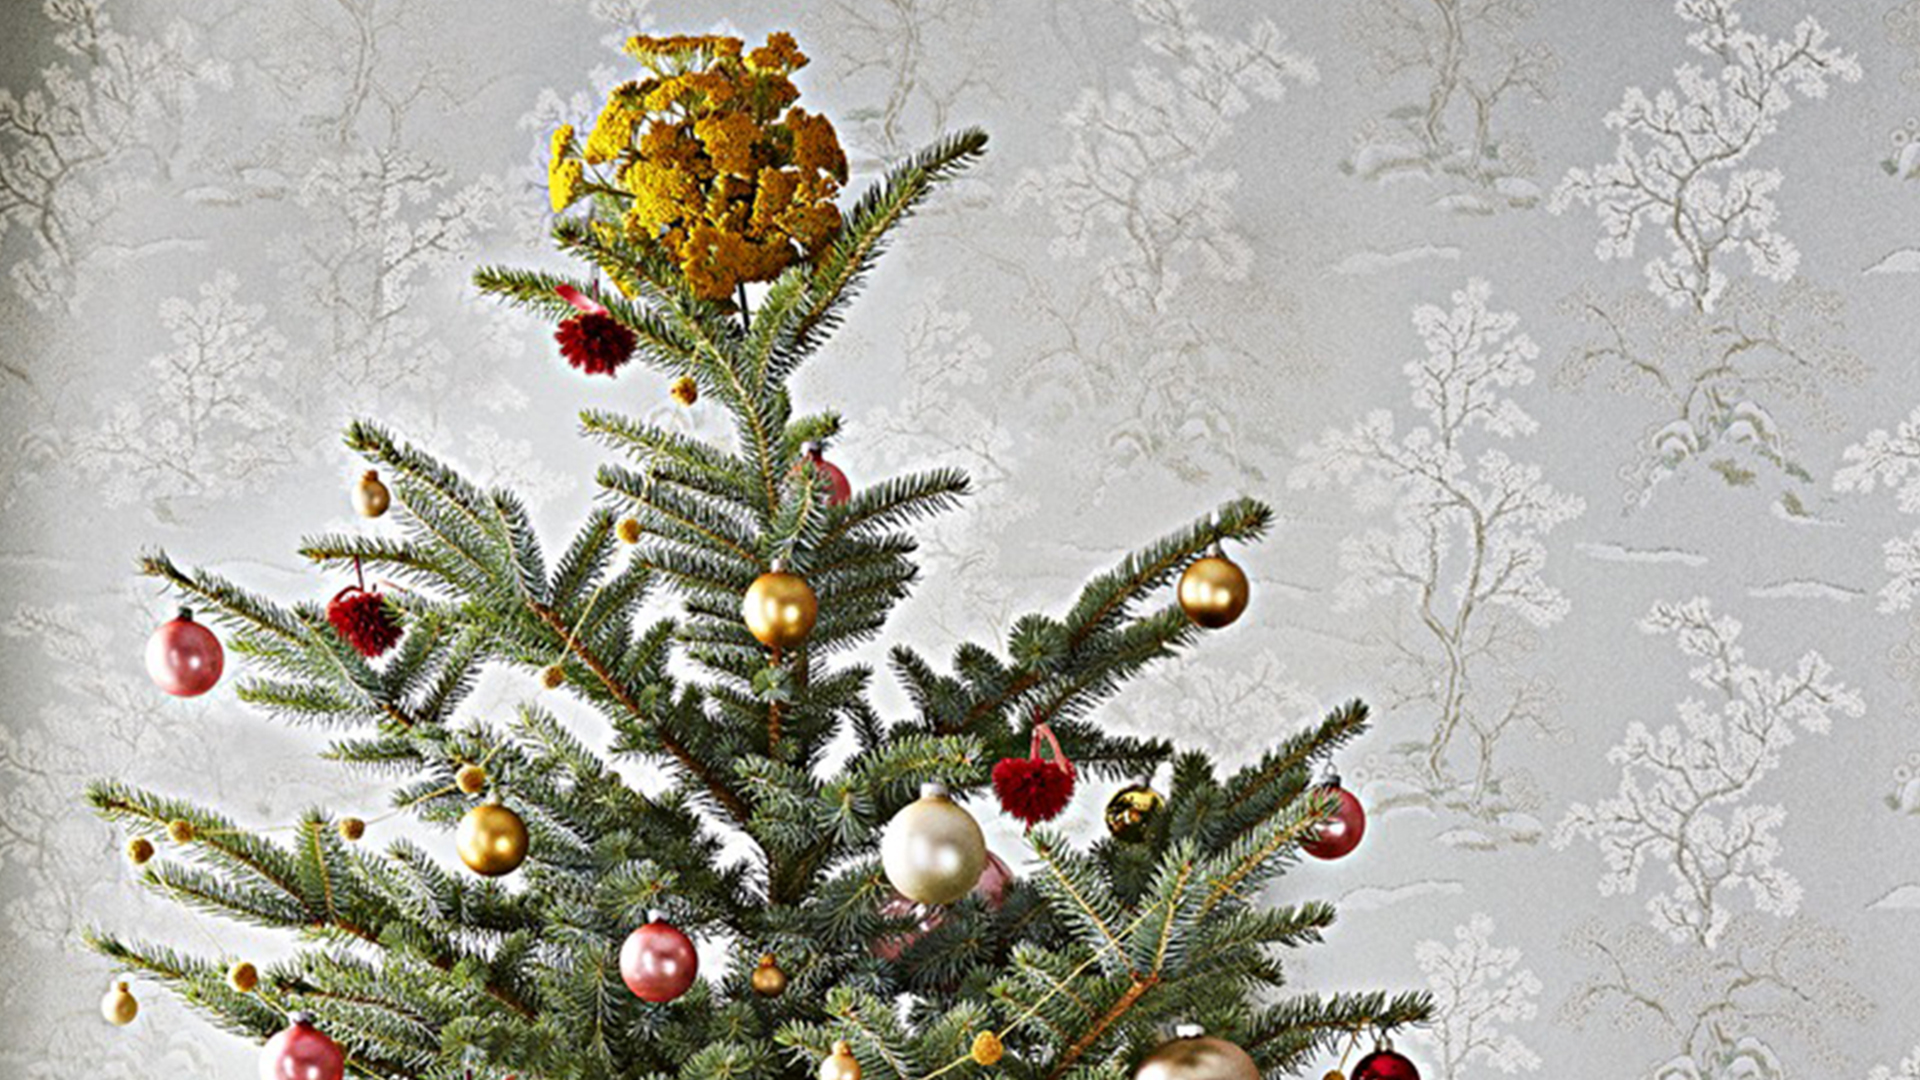 Soft and Natural Christmas Decor from Martha Stewart Living